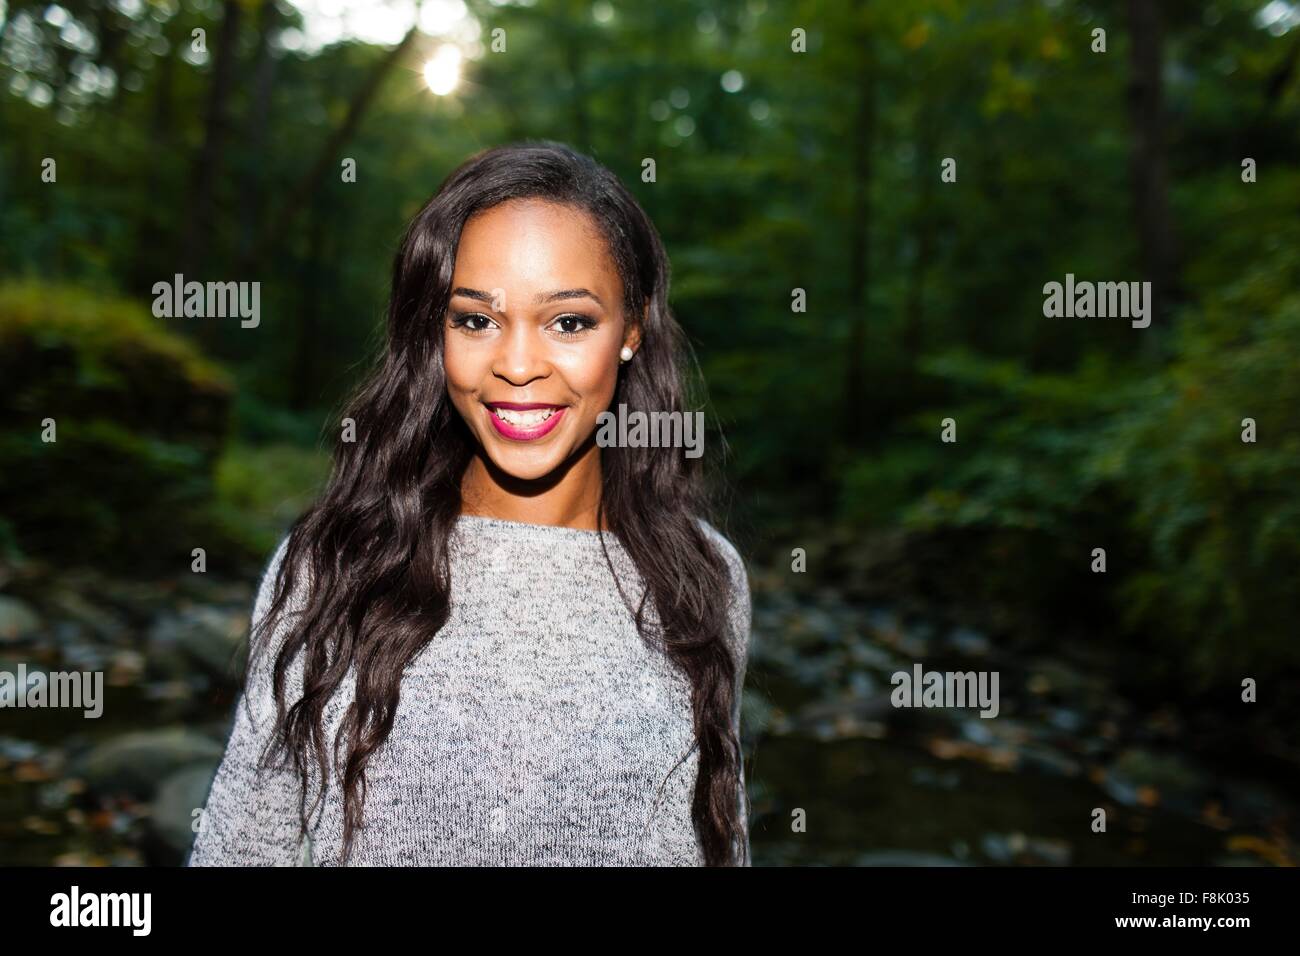 Portrait of happy young woman in darkened forest Stock Photo